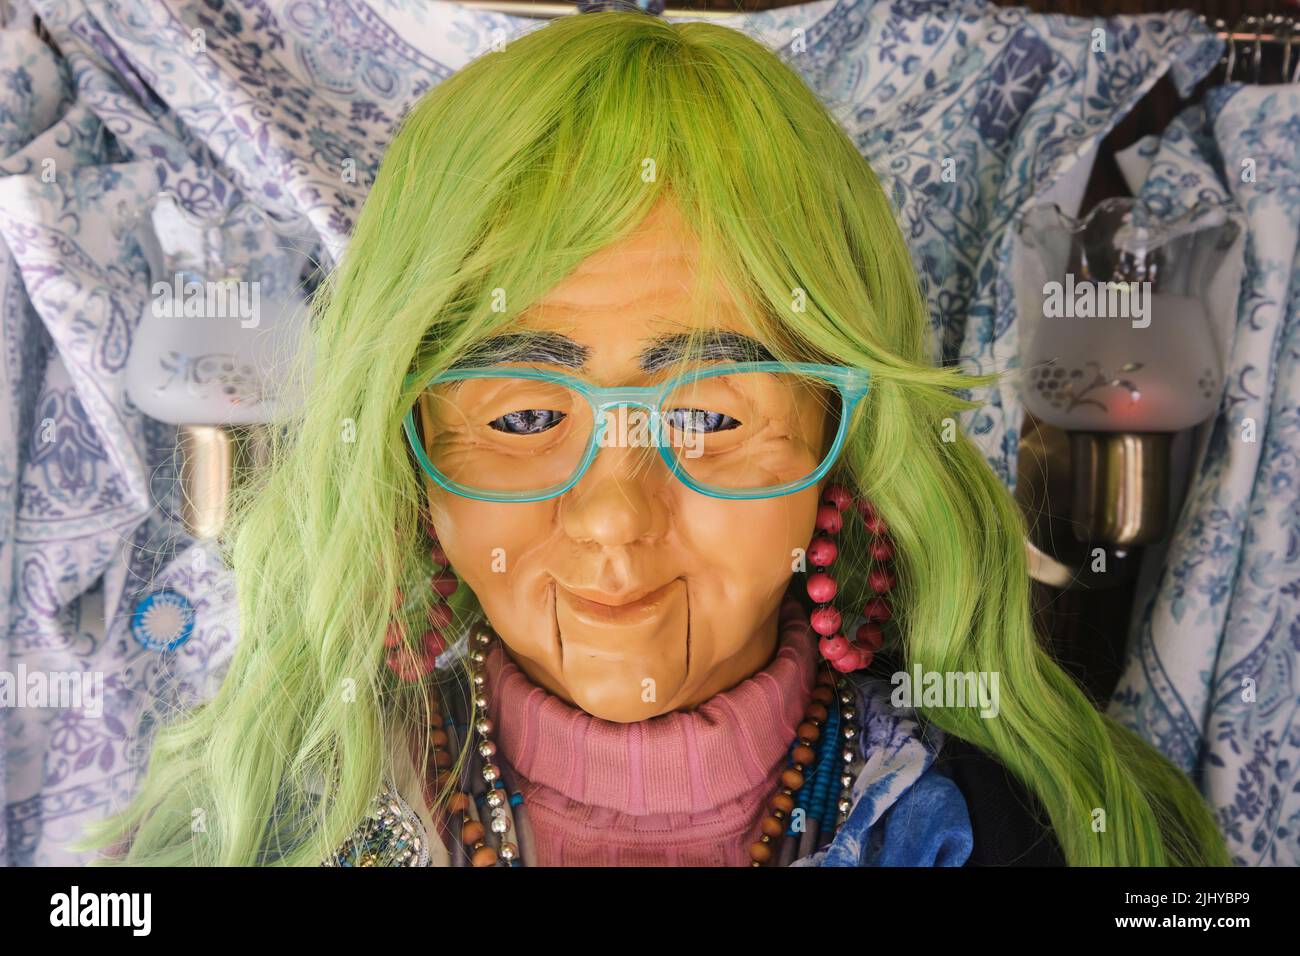 A cute, silly, creepy woman fortune teller figure with green hair. At the Stagecoach Greens miniature golf course in the Mission area of San Francisco Stock Photo